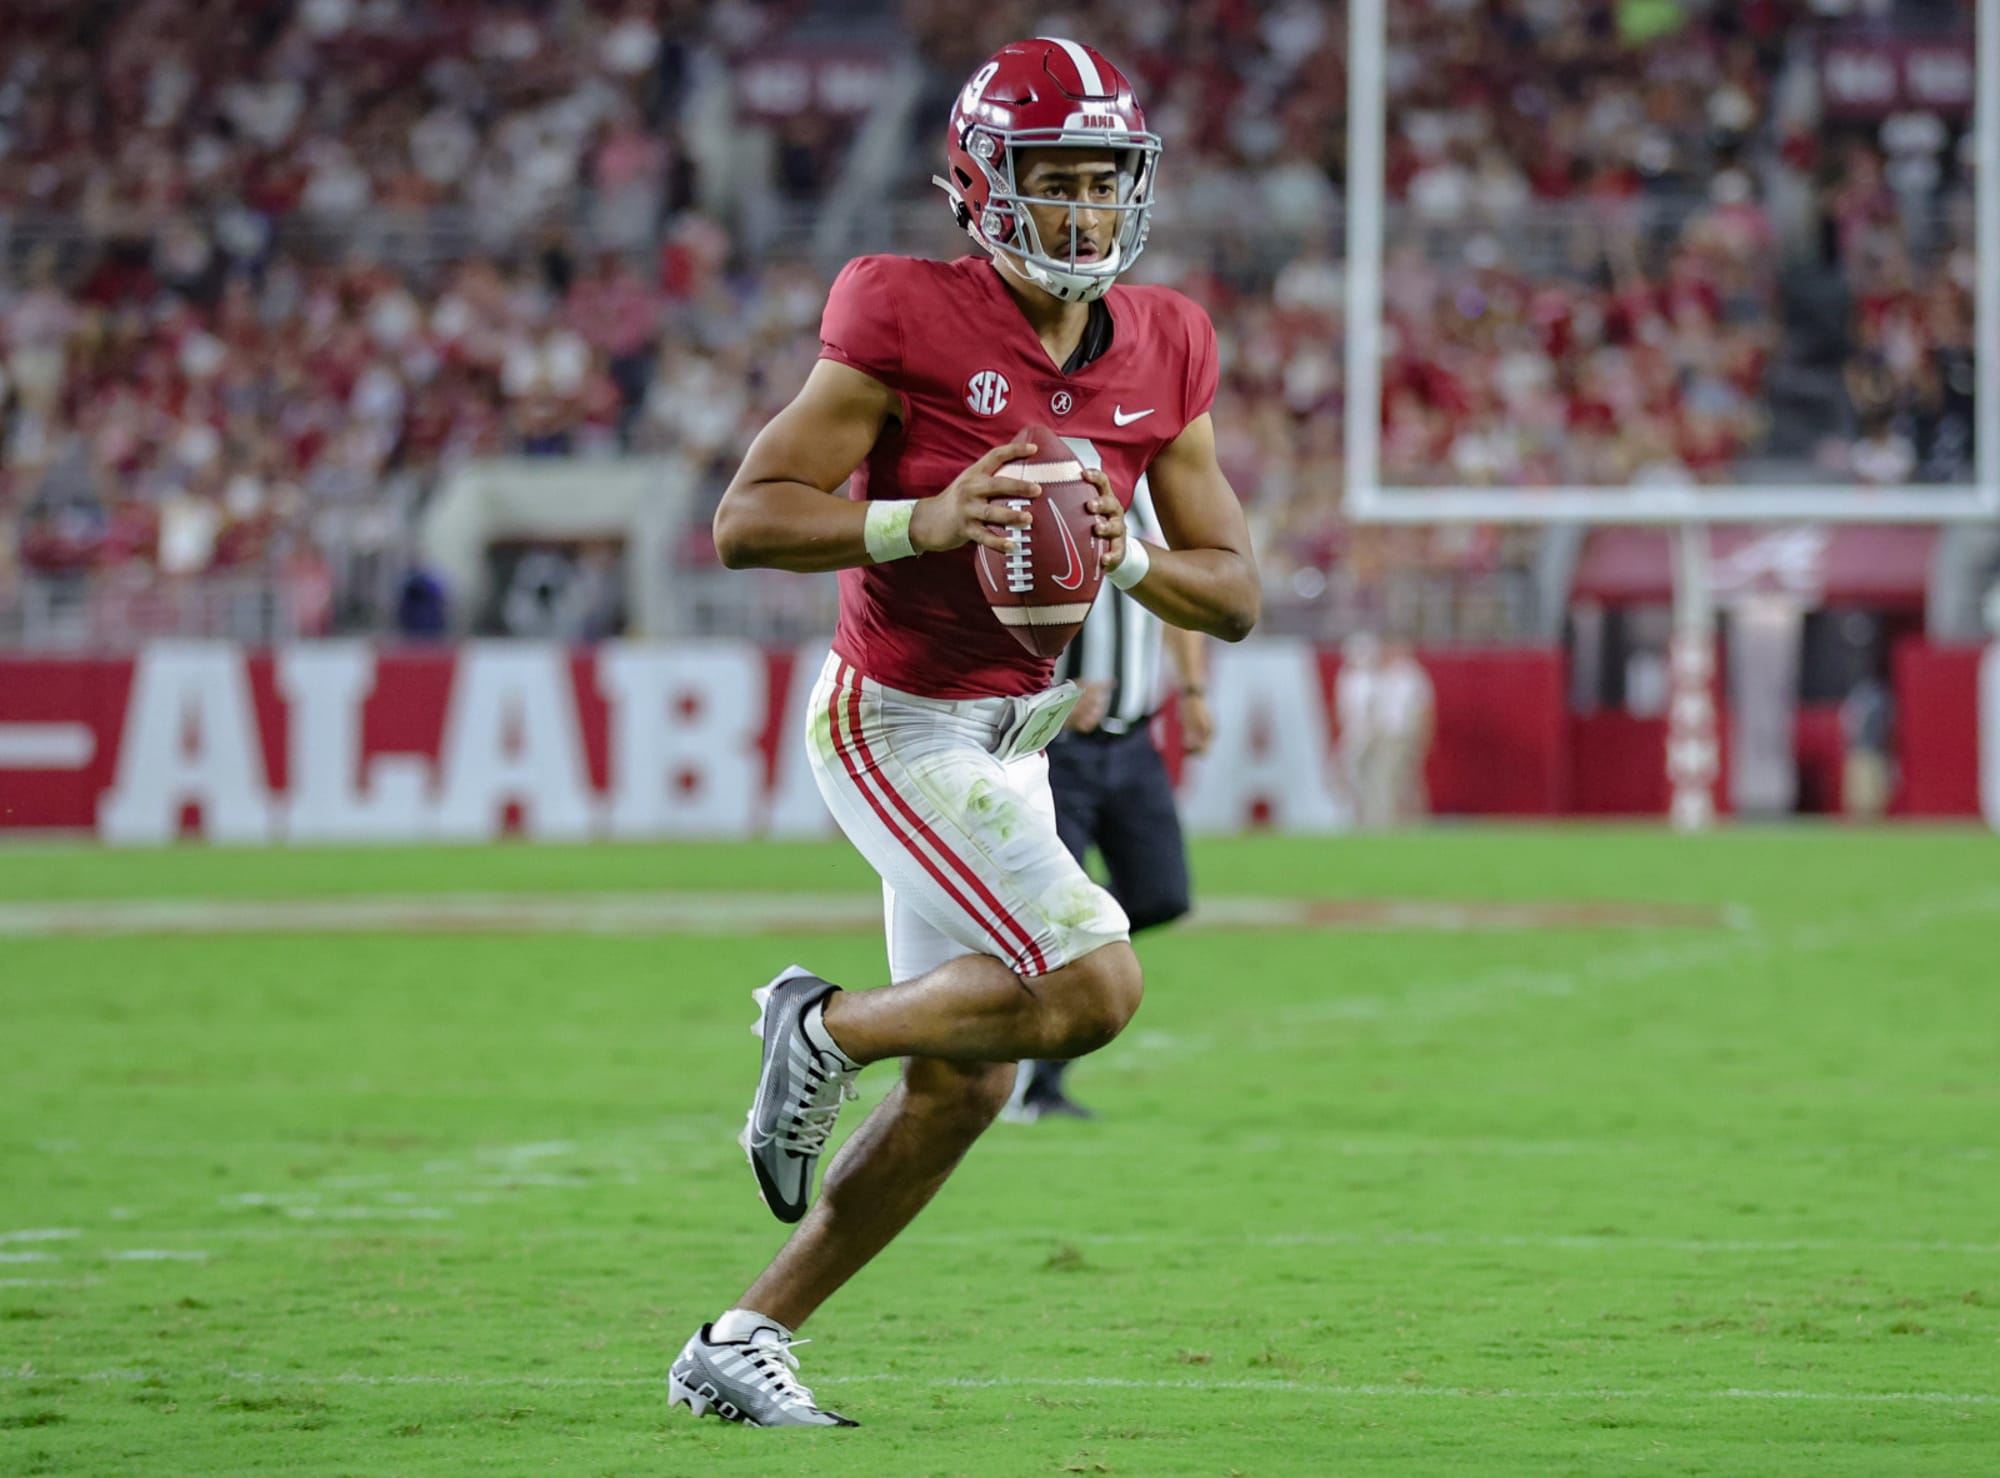 SEC Football Game Today Alabama vs Texas Line, Predictions, Odds, TV Channel and Live Stream for SEC Football